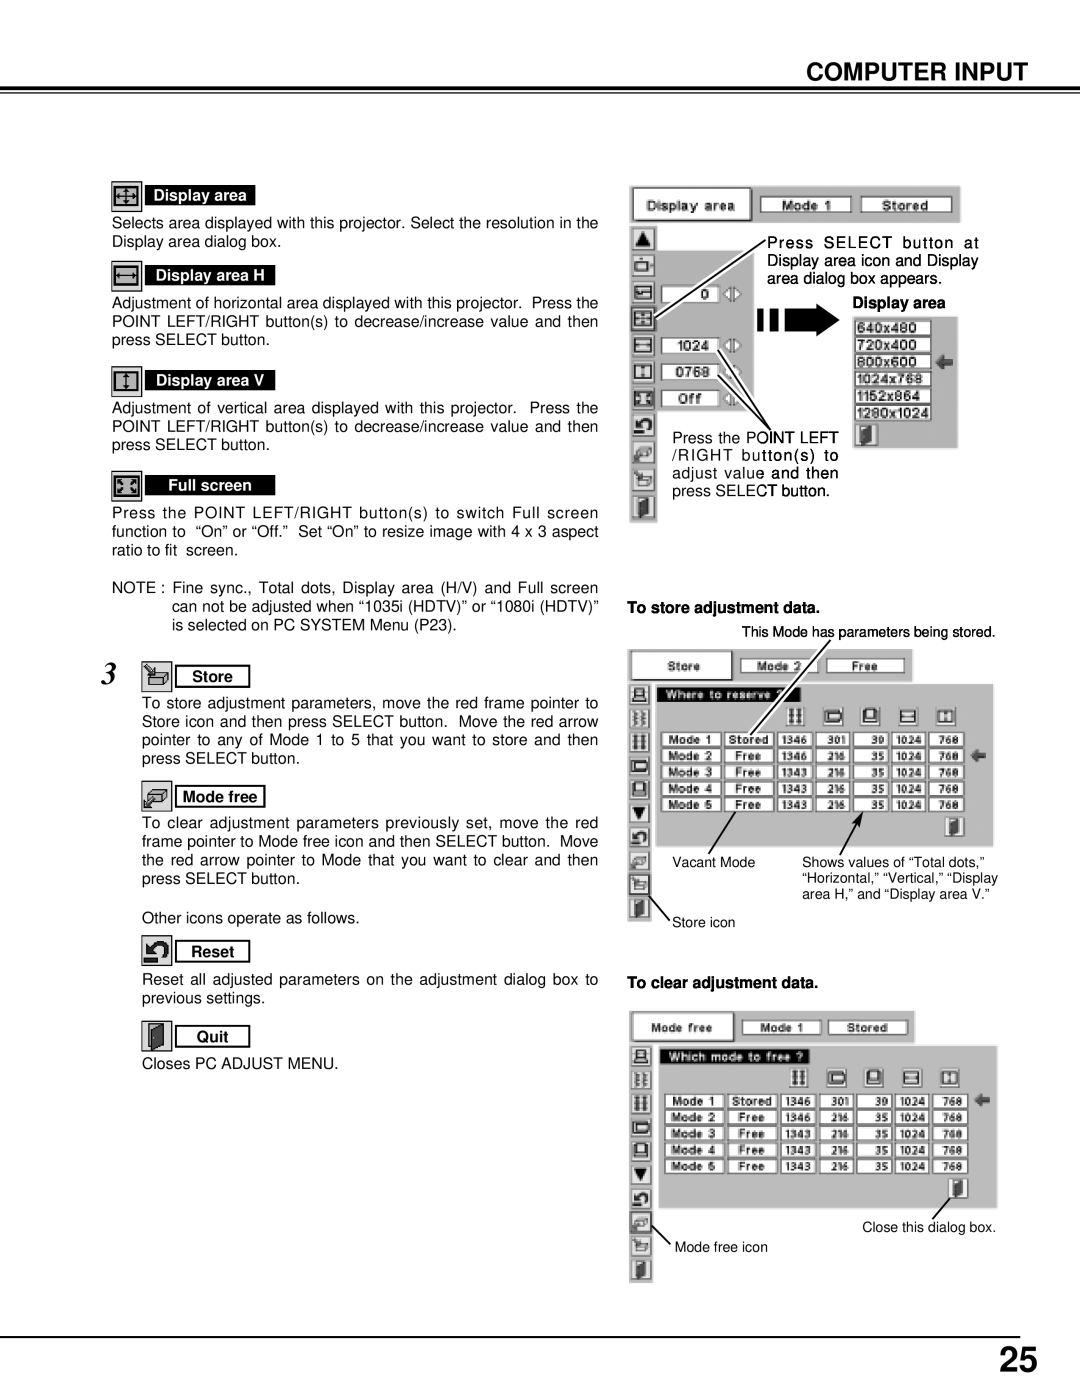 Christie Digital Systems 38-VIV205-01 user manual Computer Input, Store, Mode free, Reset, Quit, Display area 